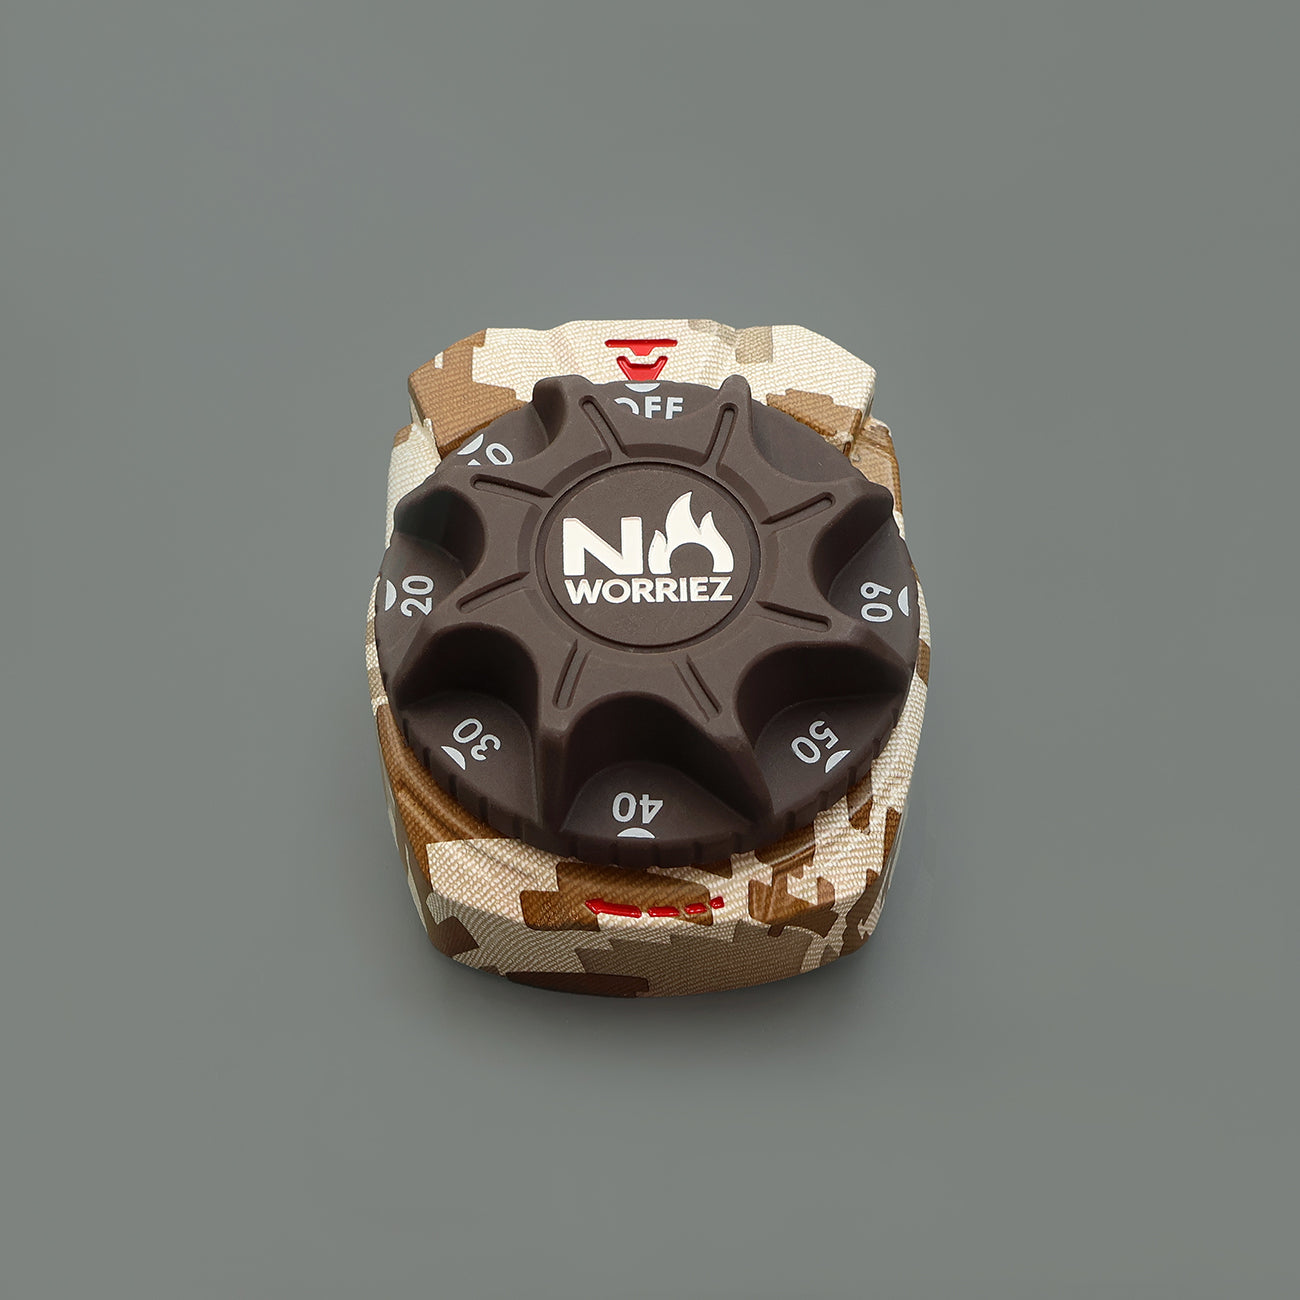 CAMO-printed Gas Grill Shut Off Timer close look